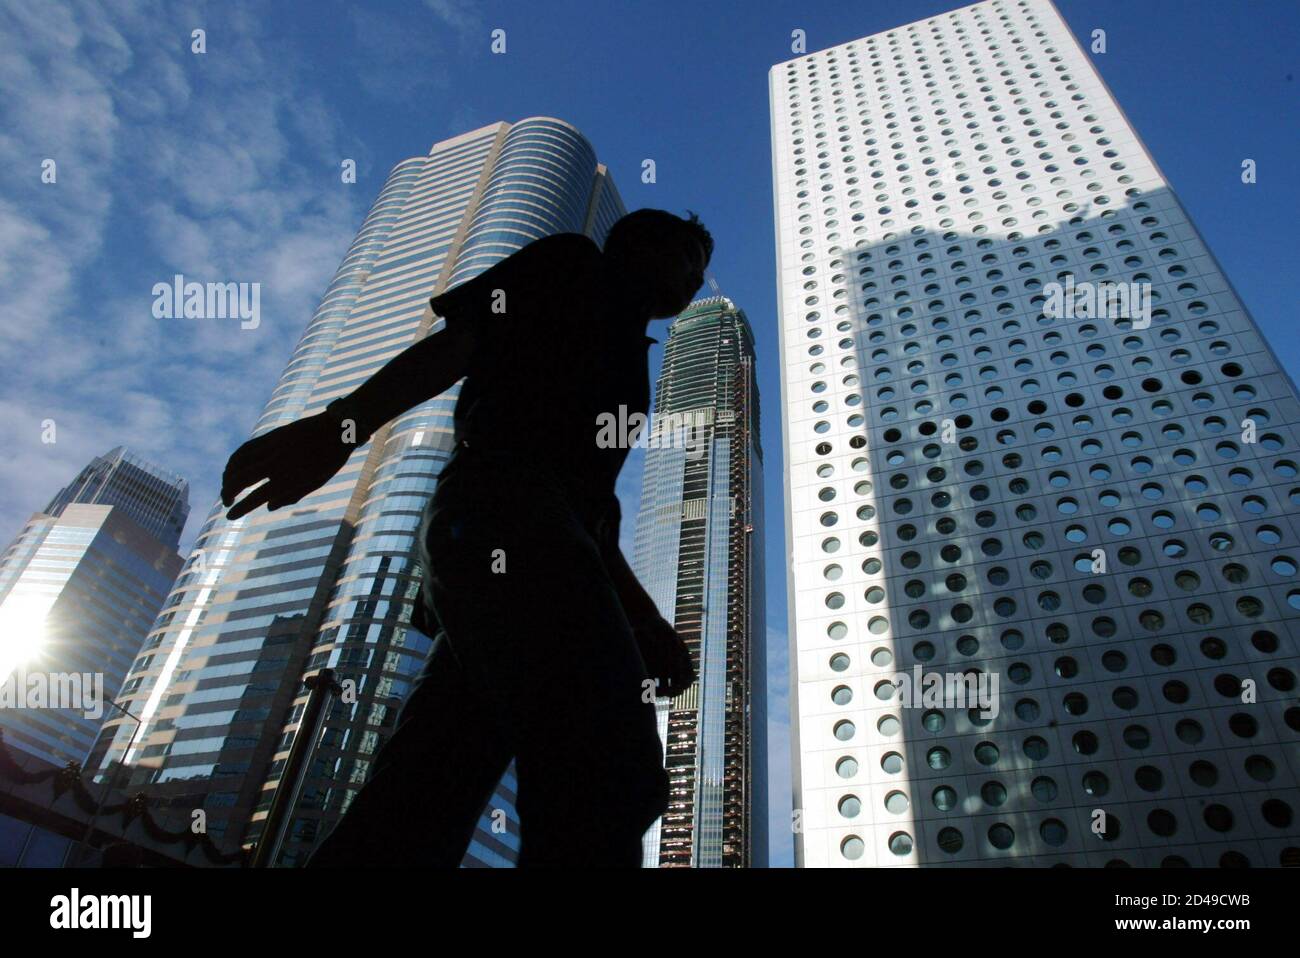 A man walks past buildings in central business district in Hong Kong December 16, 2002. [Hong Kong's unemployment rate stood at 7.1 percent in the three months to end November on a seasonally adjusted basis, the government said on Monday. The figure stood at 7.2 percent in the August to October period.] Stock Photo